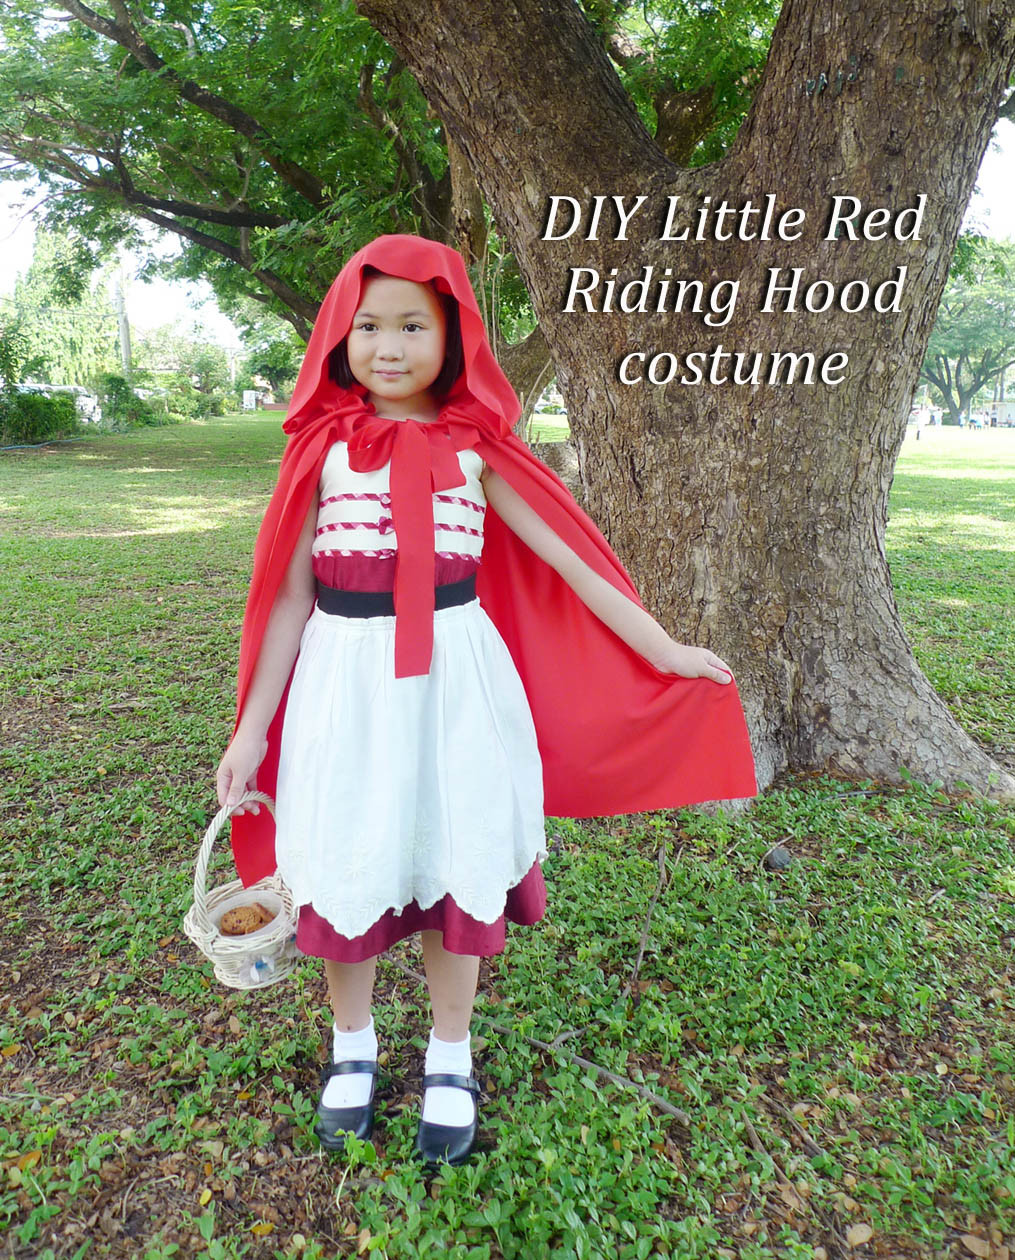 DIY Little Red Riding Hood Costume For Adults
 MrsMommyHolic DIY Little Red Riding Hood Costume